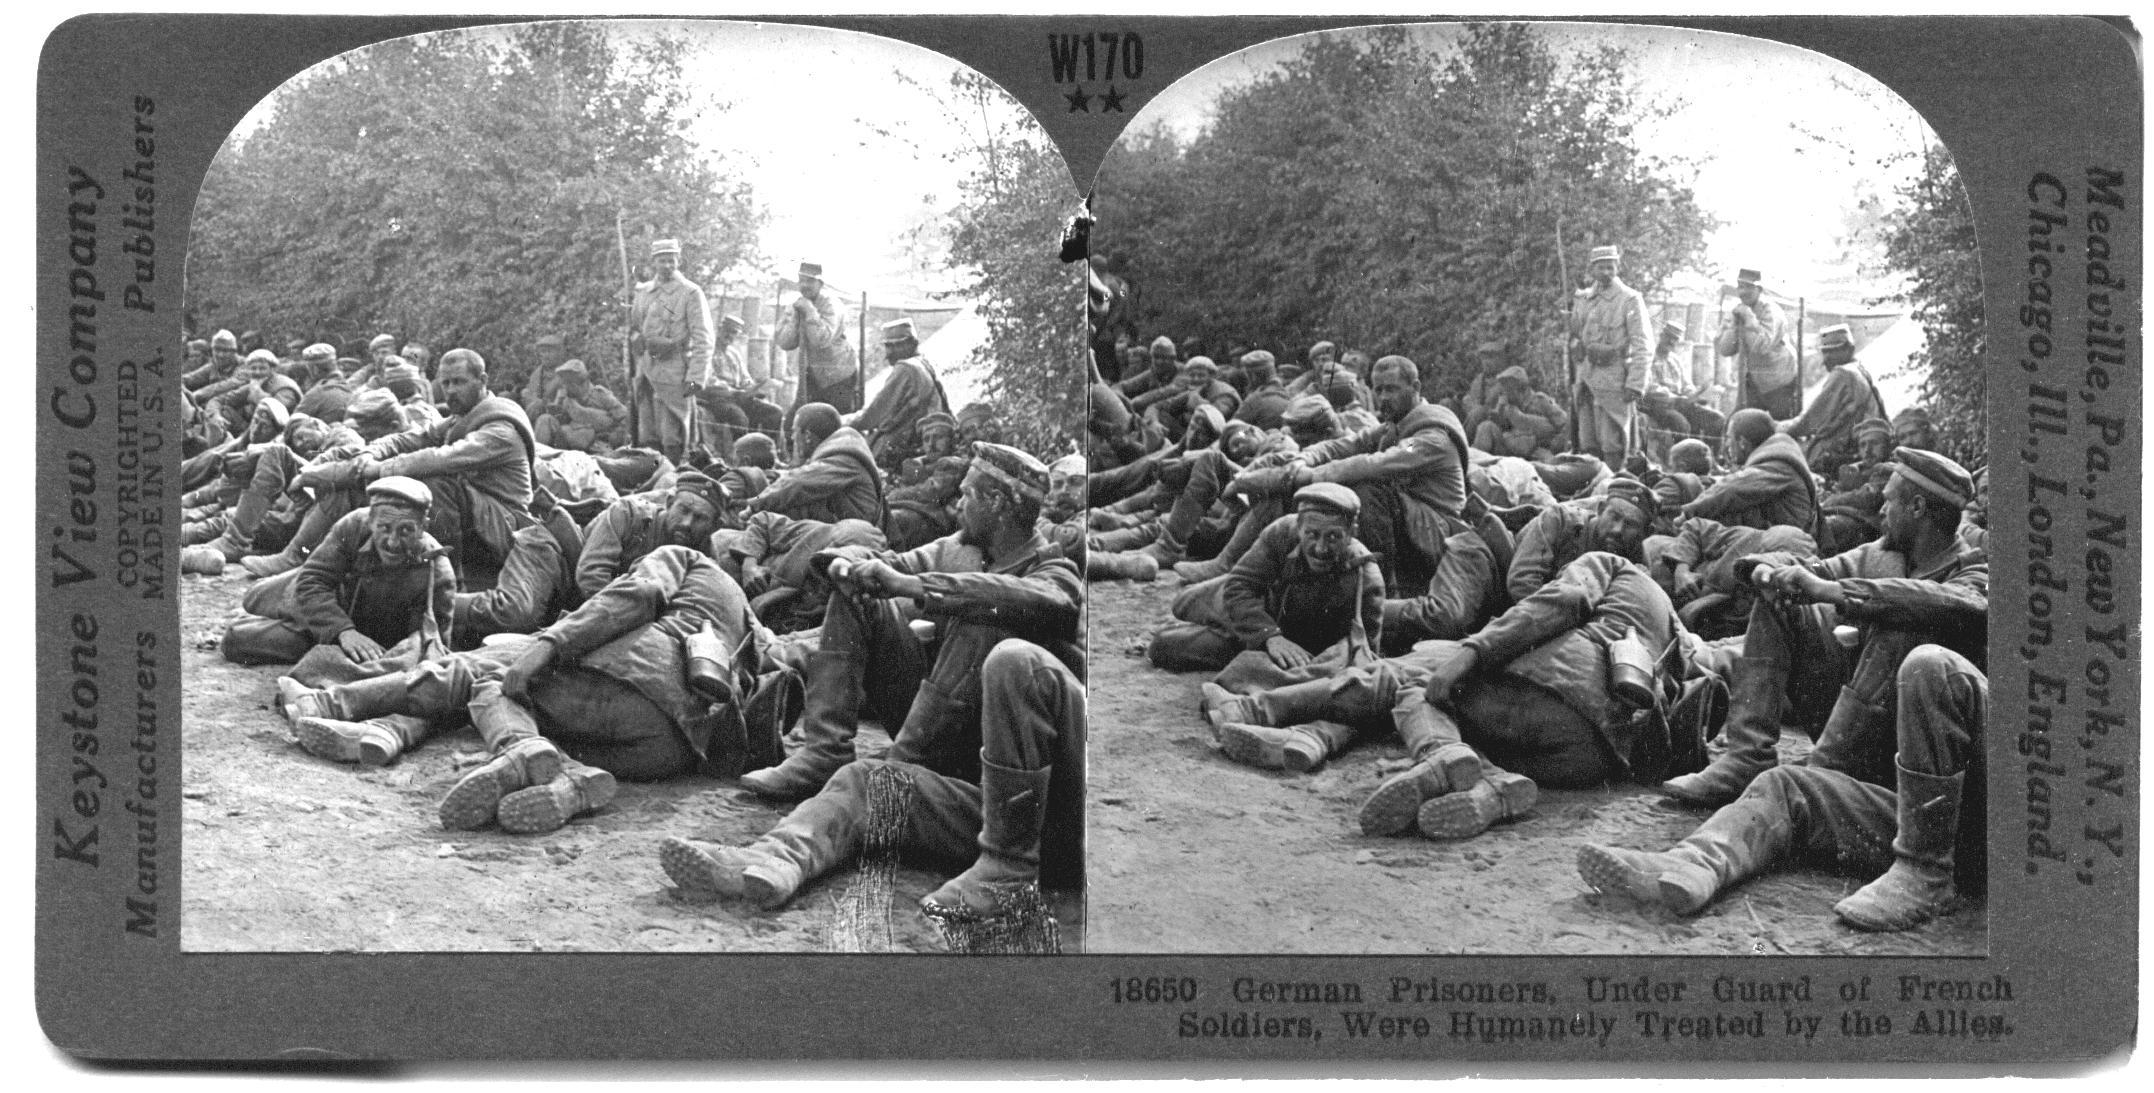 German Prisoners, Under Guard of French Soldiers, Were Humanely Treated by the Allies